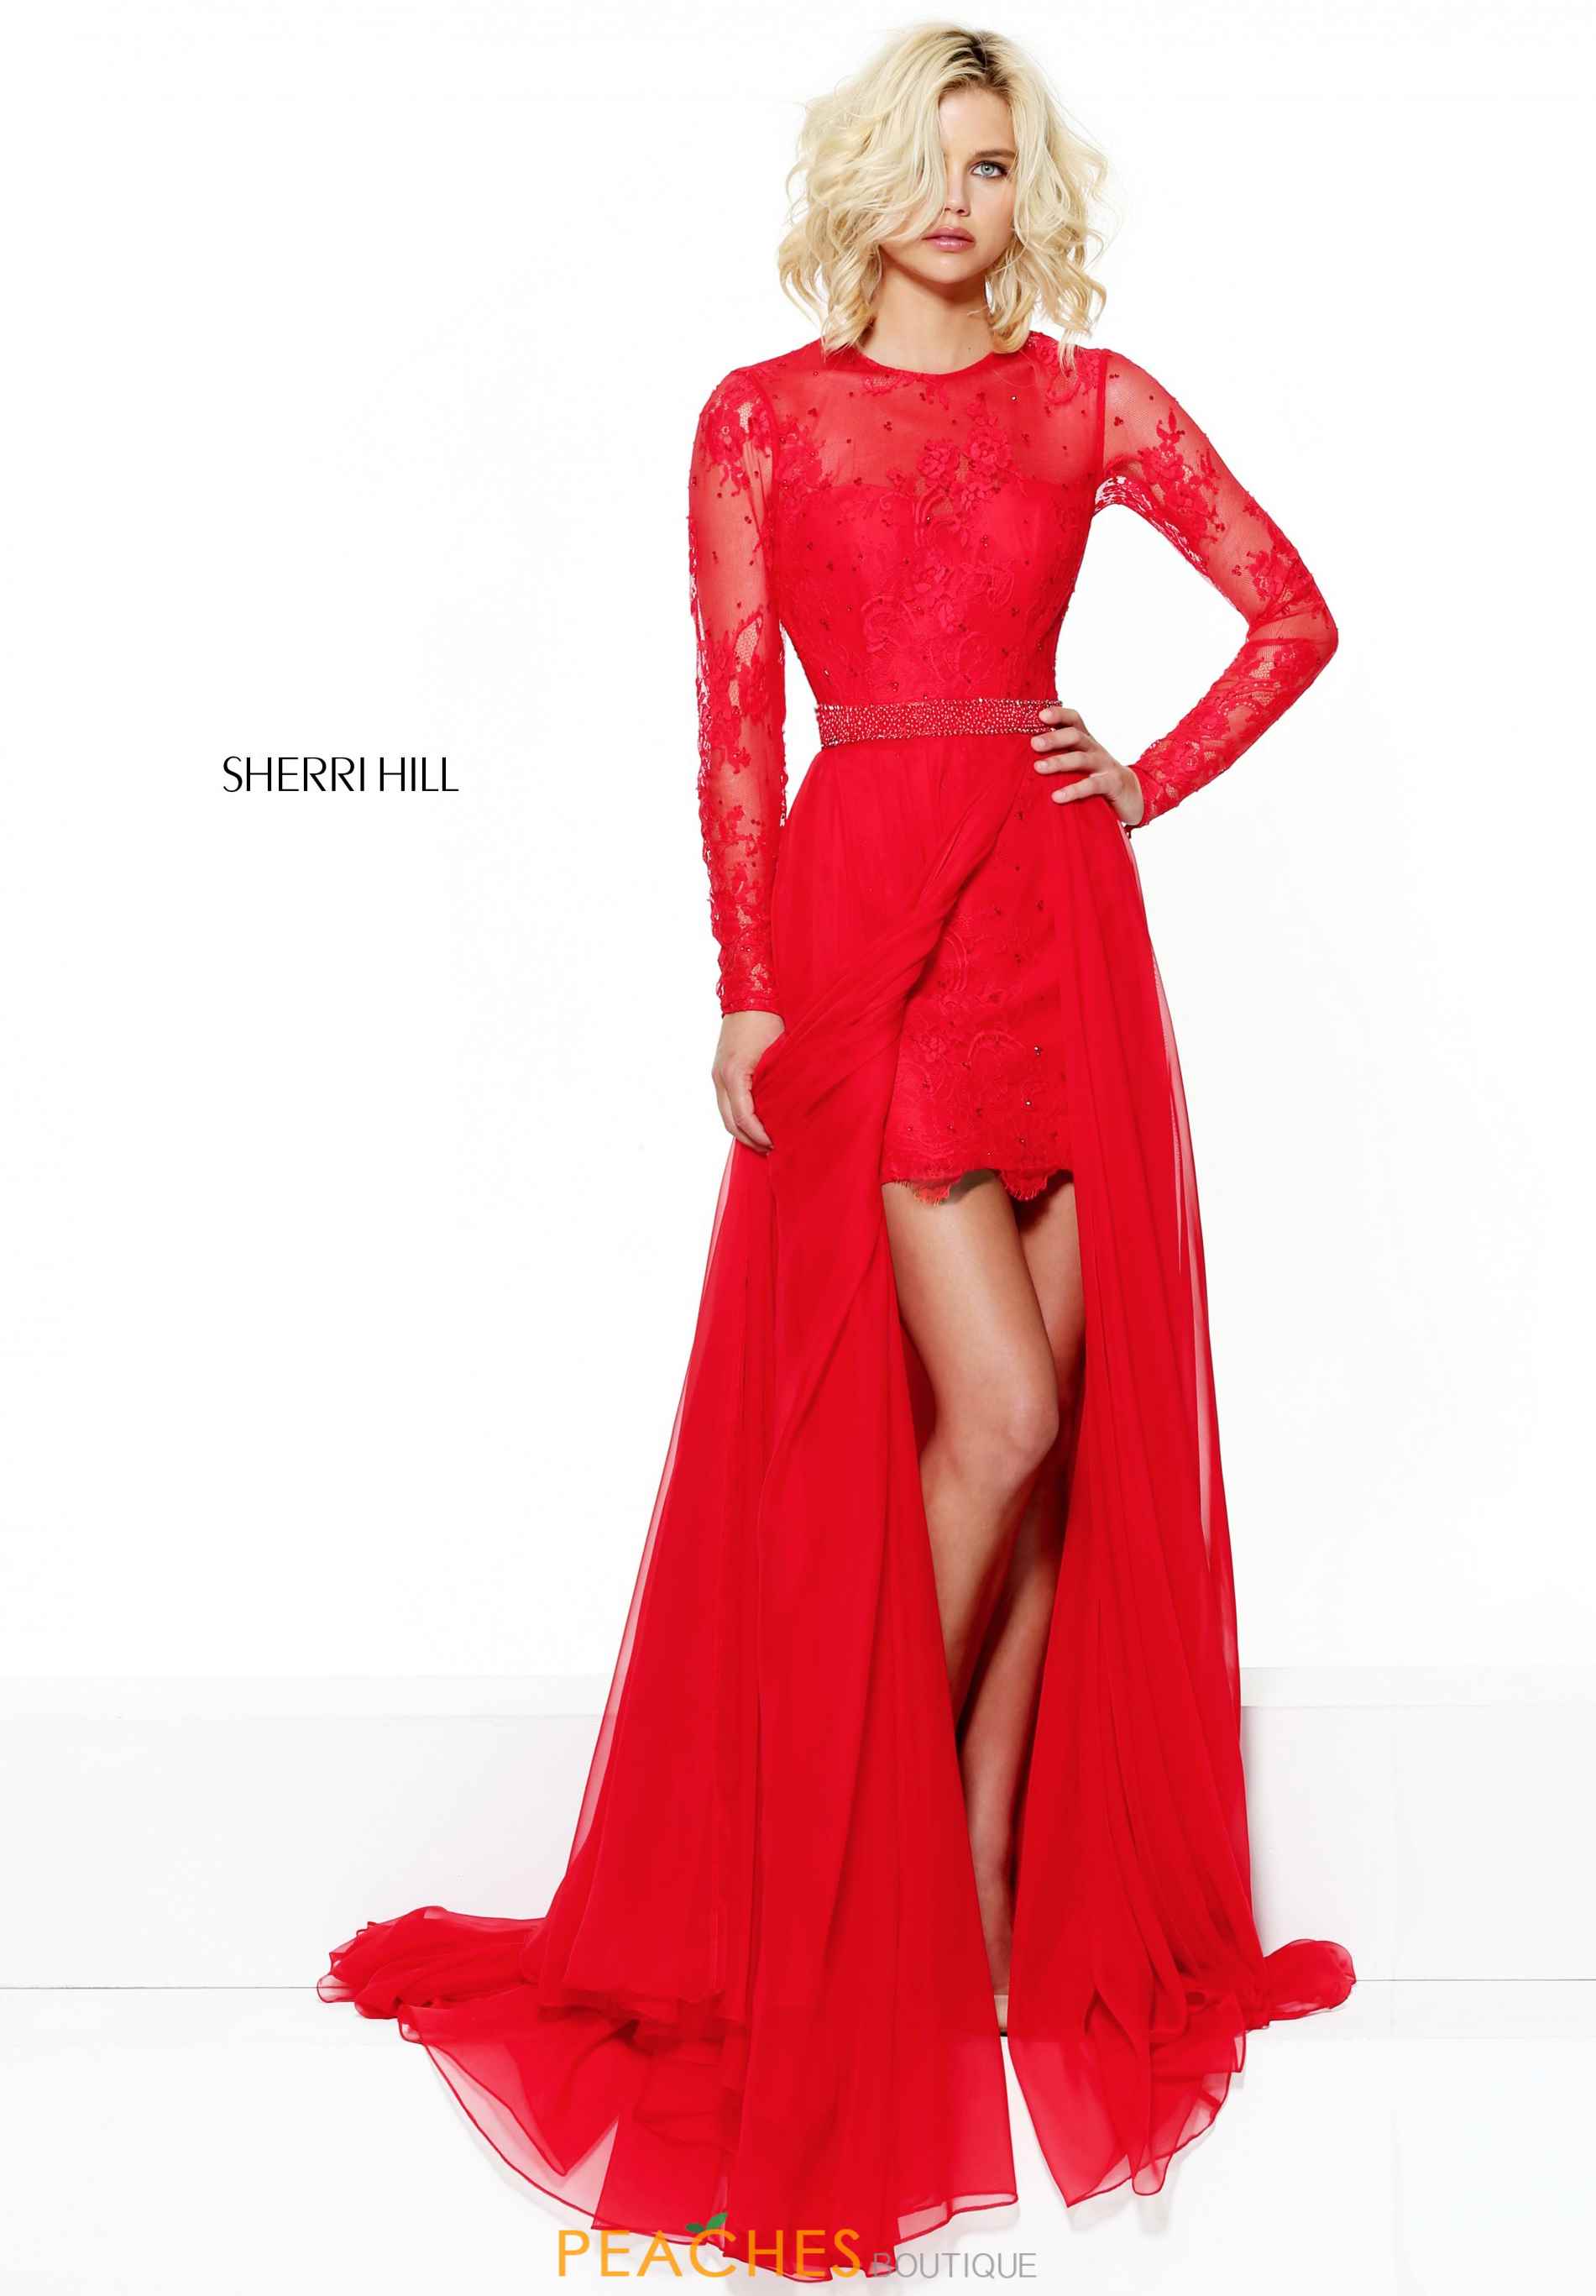 Expert Tips For Wearing A Red Dress